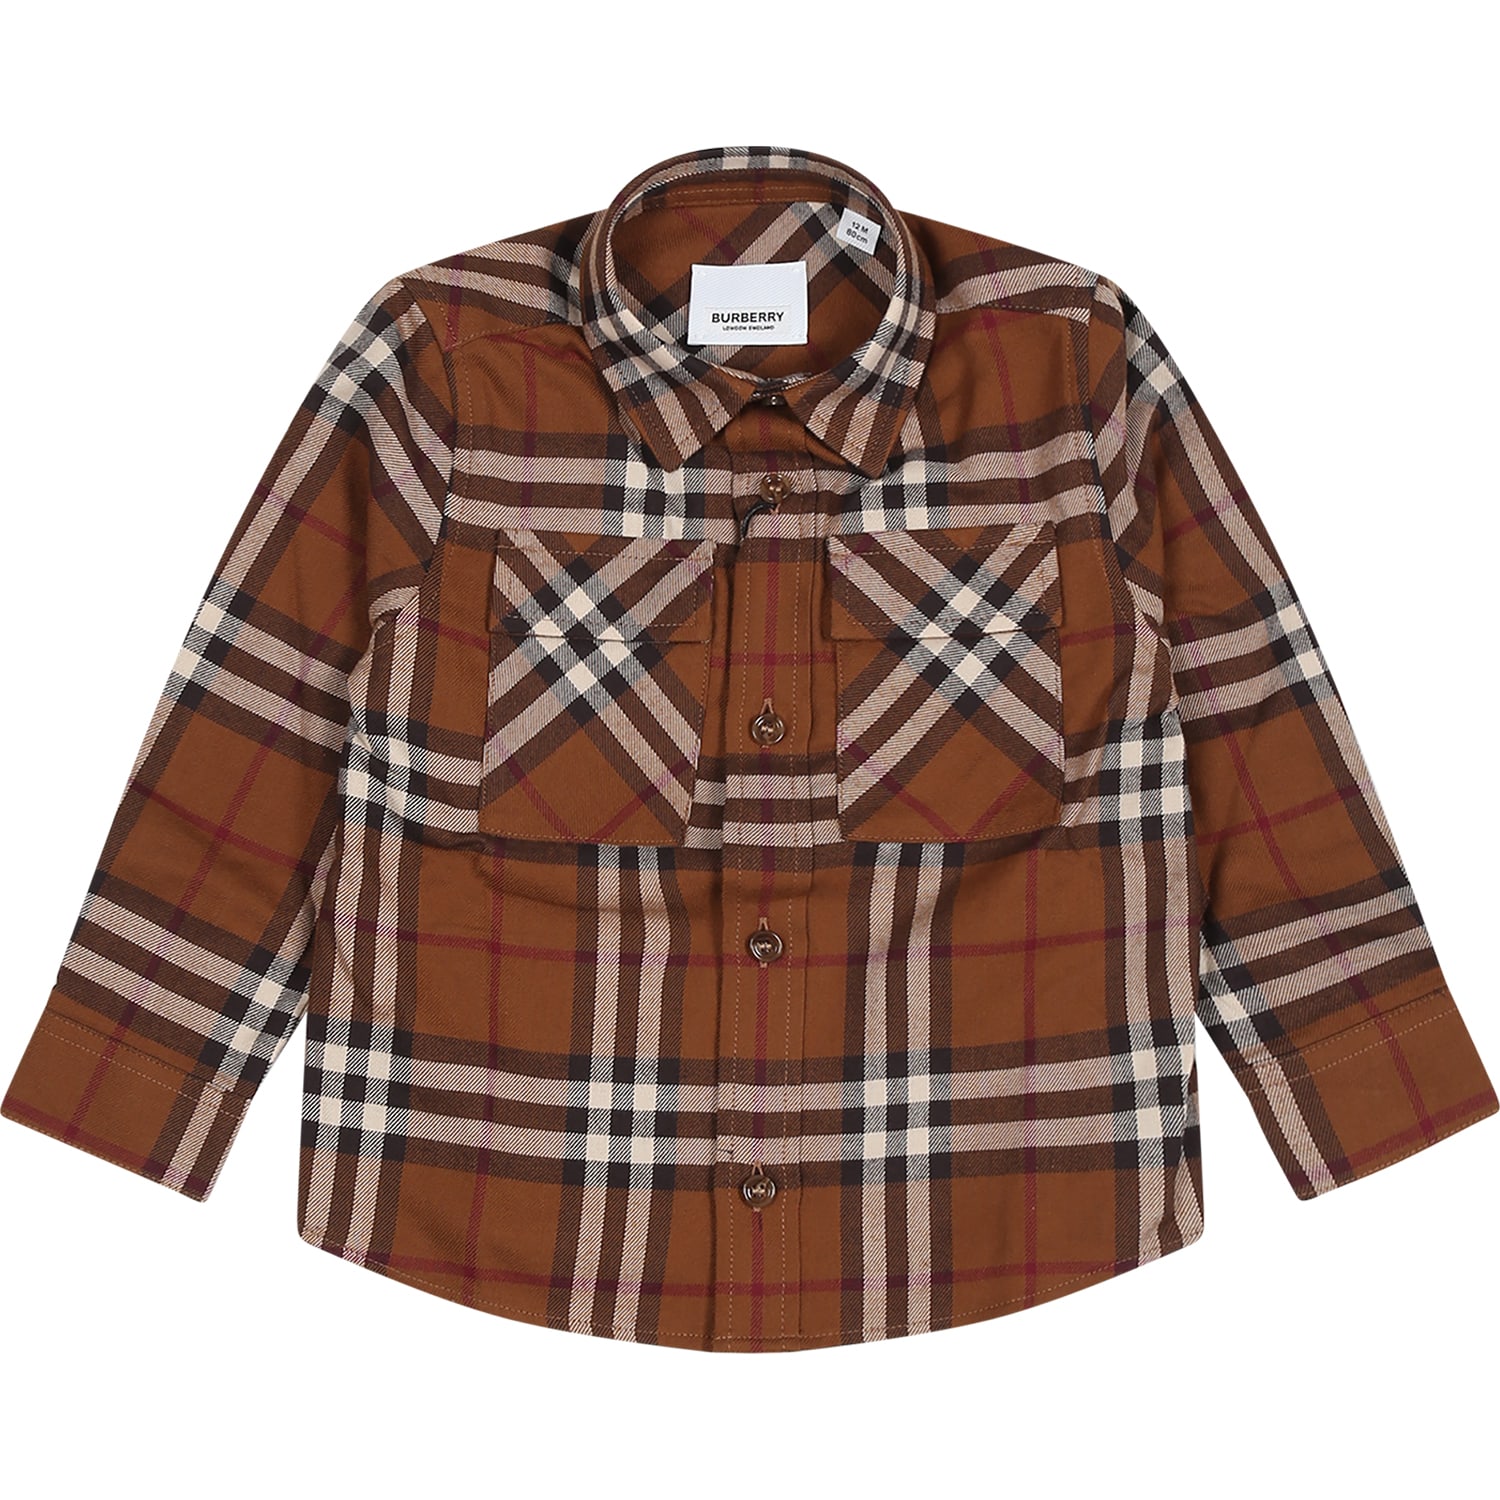 BURBERRY BROWN BABY BOY SHIRT WITH ICONIC CHECK